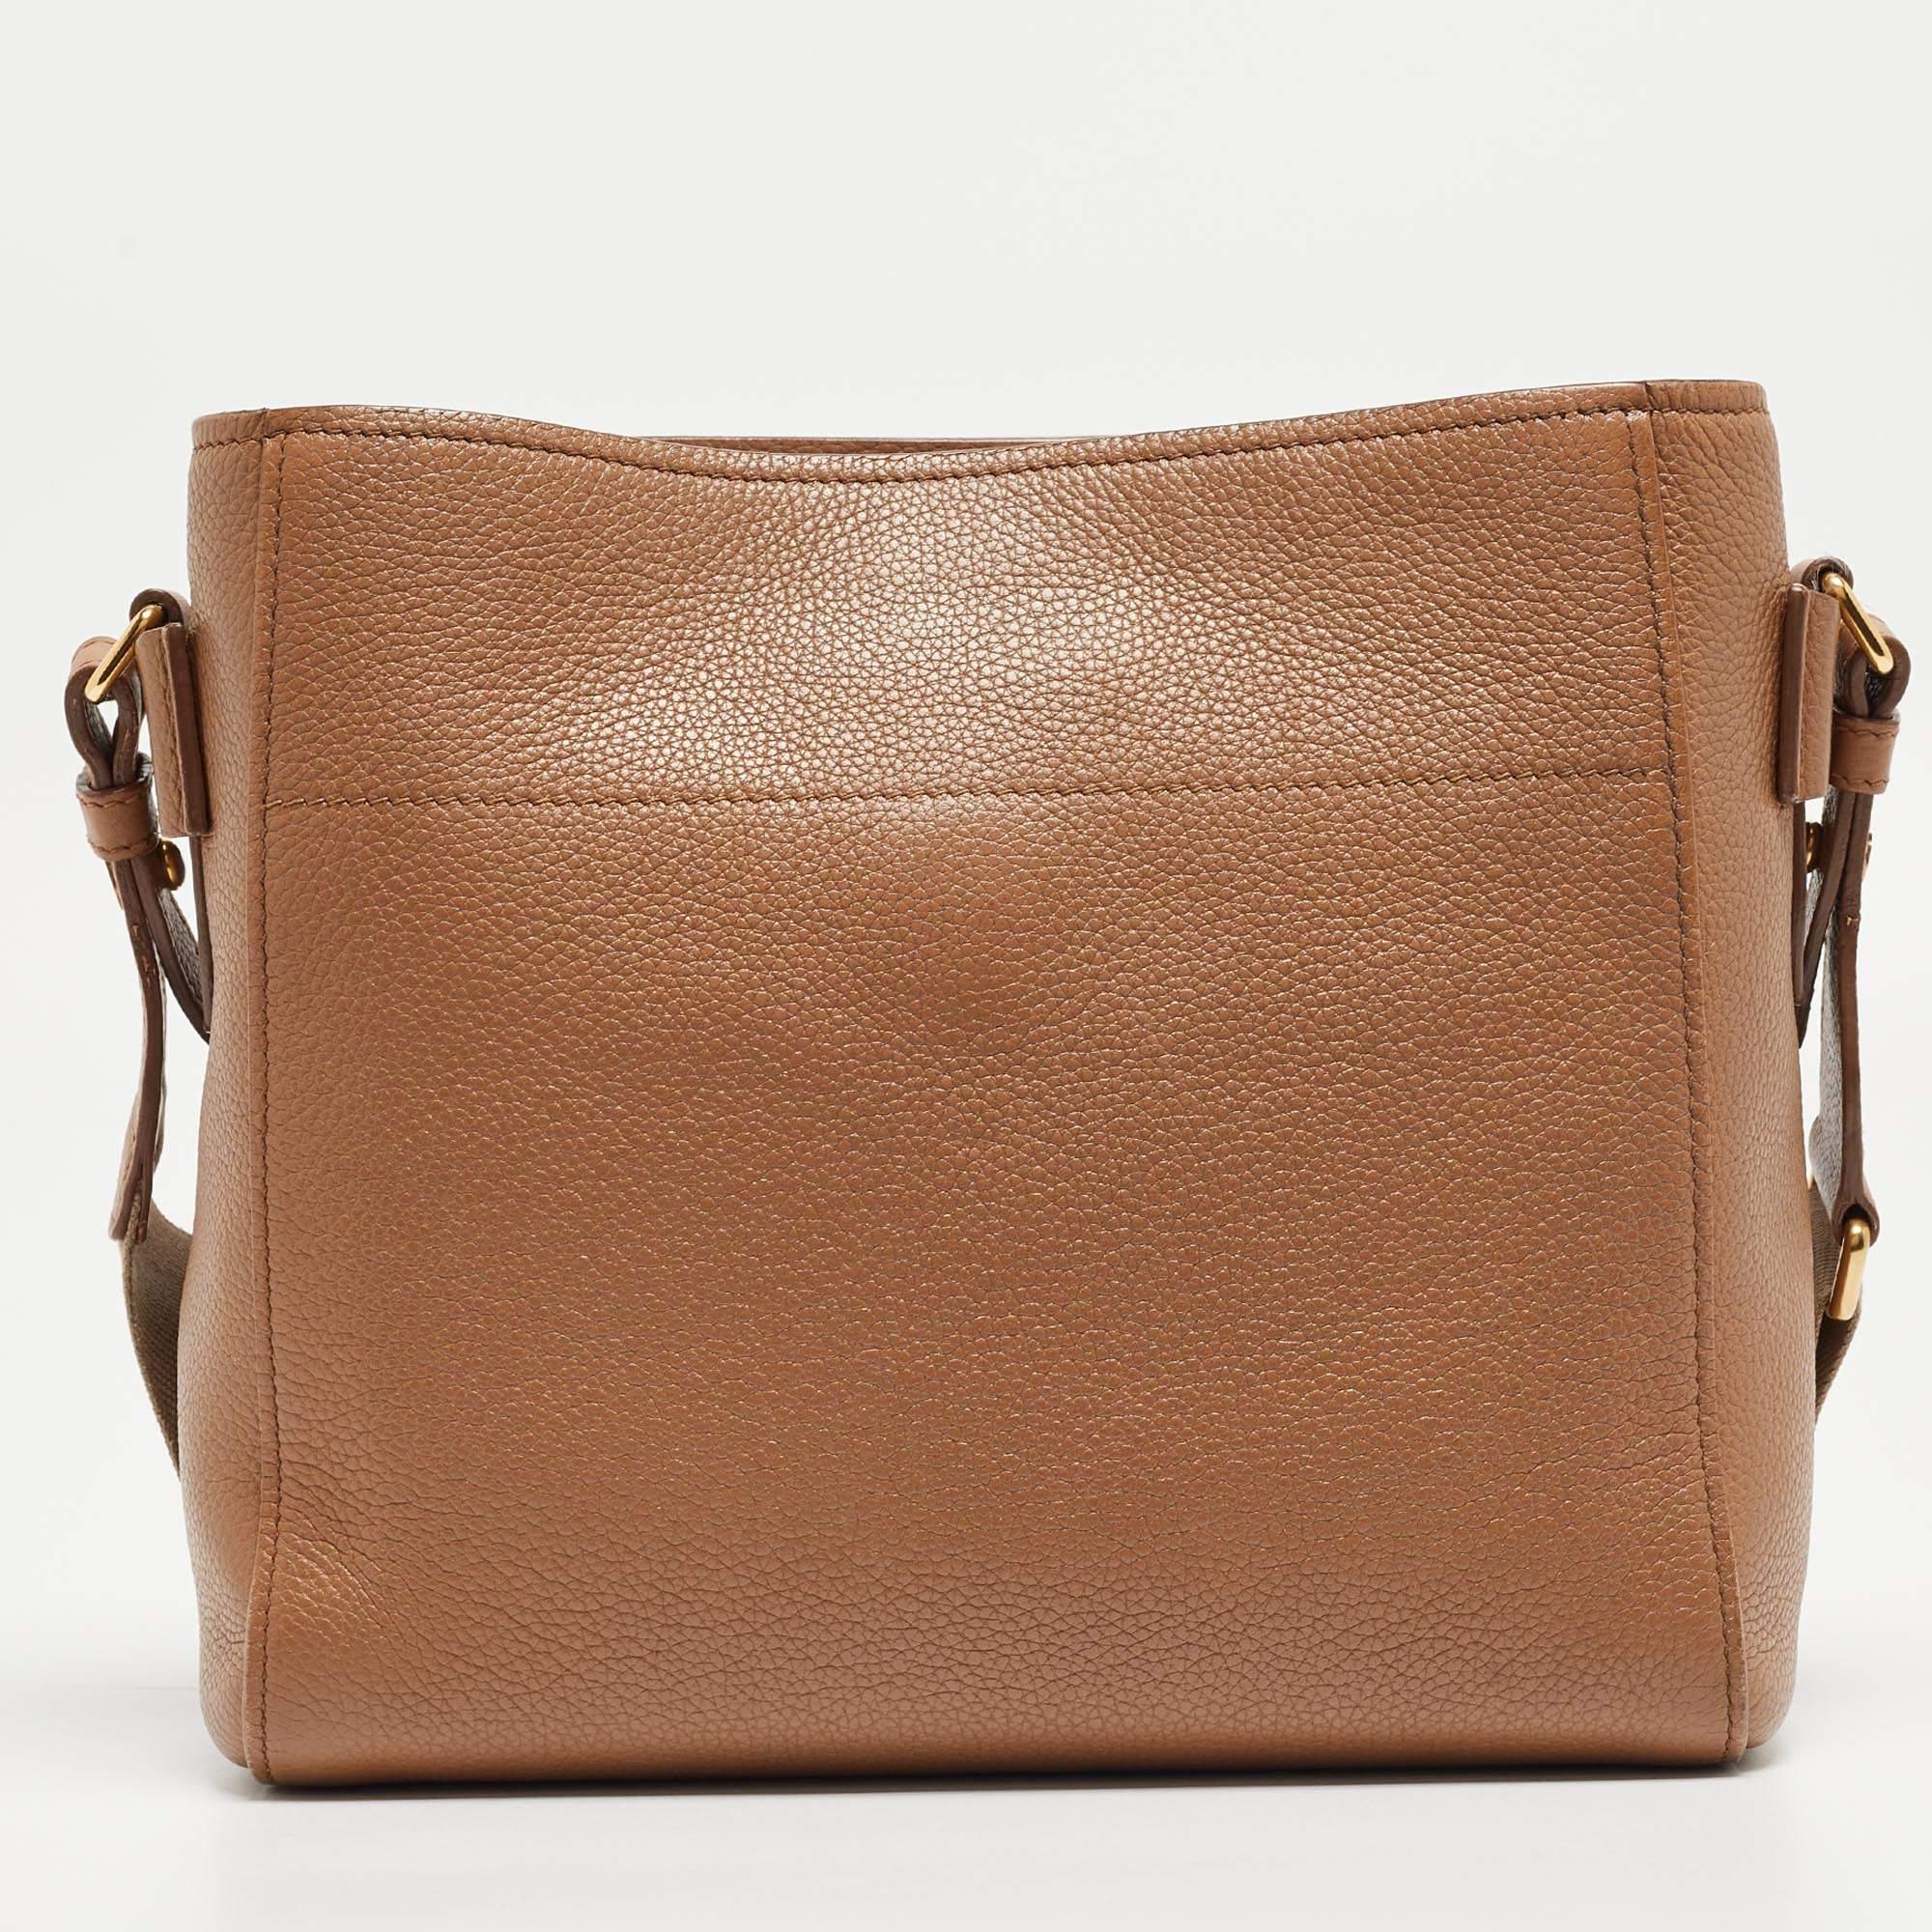 This bag from Prada adds a signature touch to your outfit and elevates its trend quotient. A piece like this brown bag will be your go-to for most of the outfits in your closet. Look super cool and trendy by adorning this beautiful leather bag.

